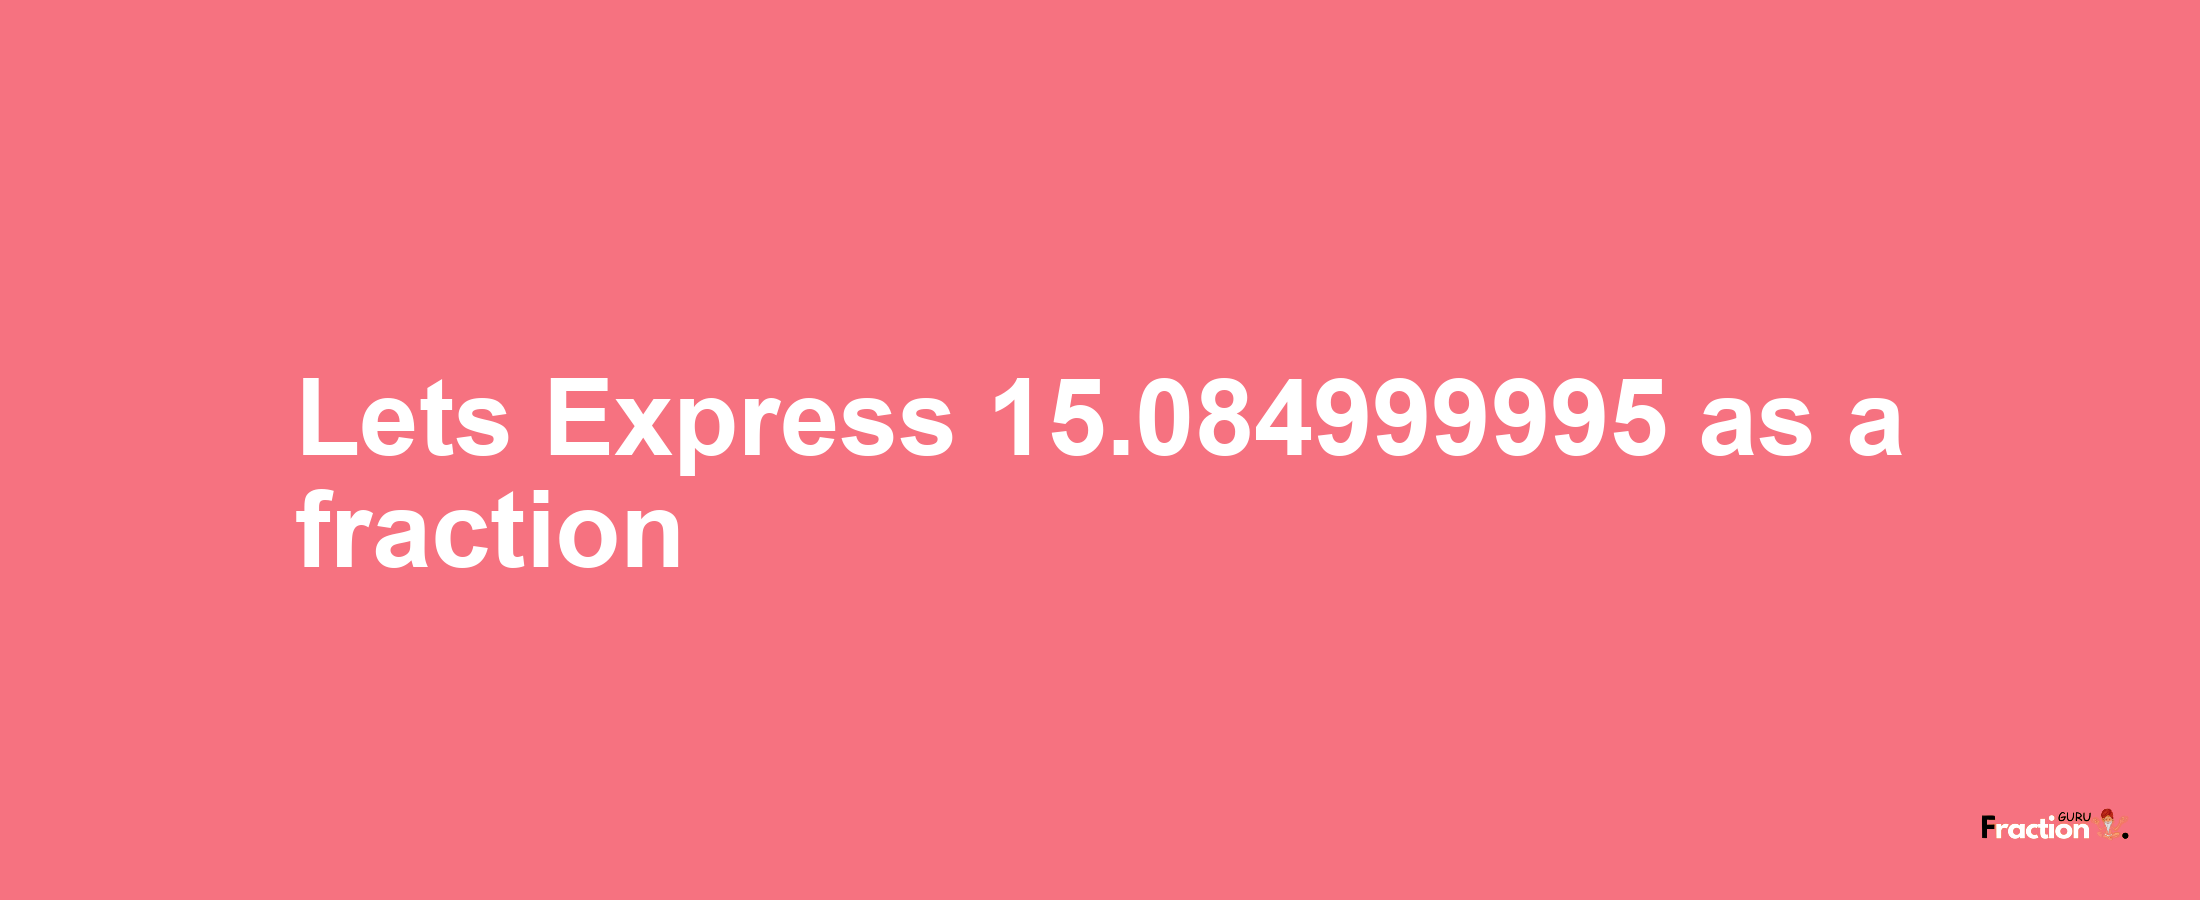 Lets Express 15.084999995 as afraction